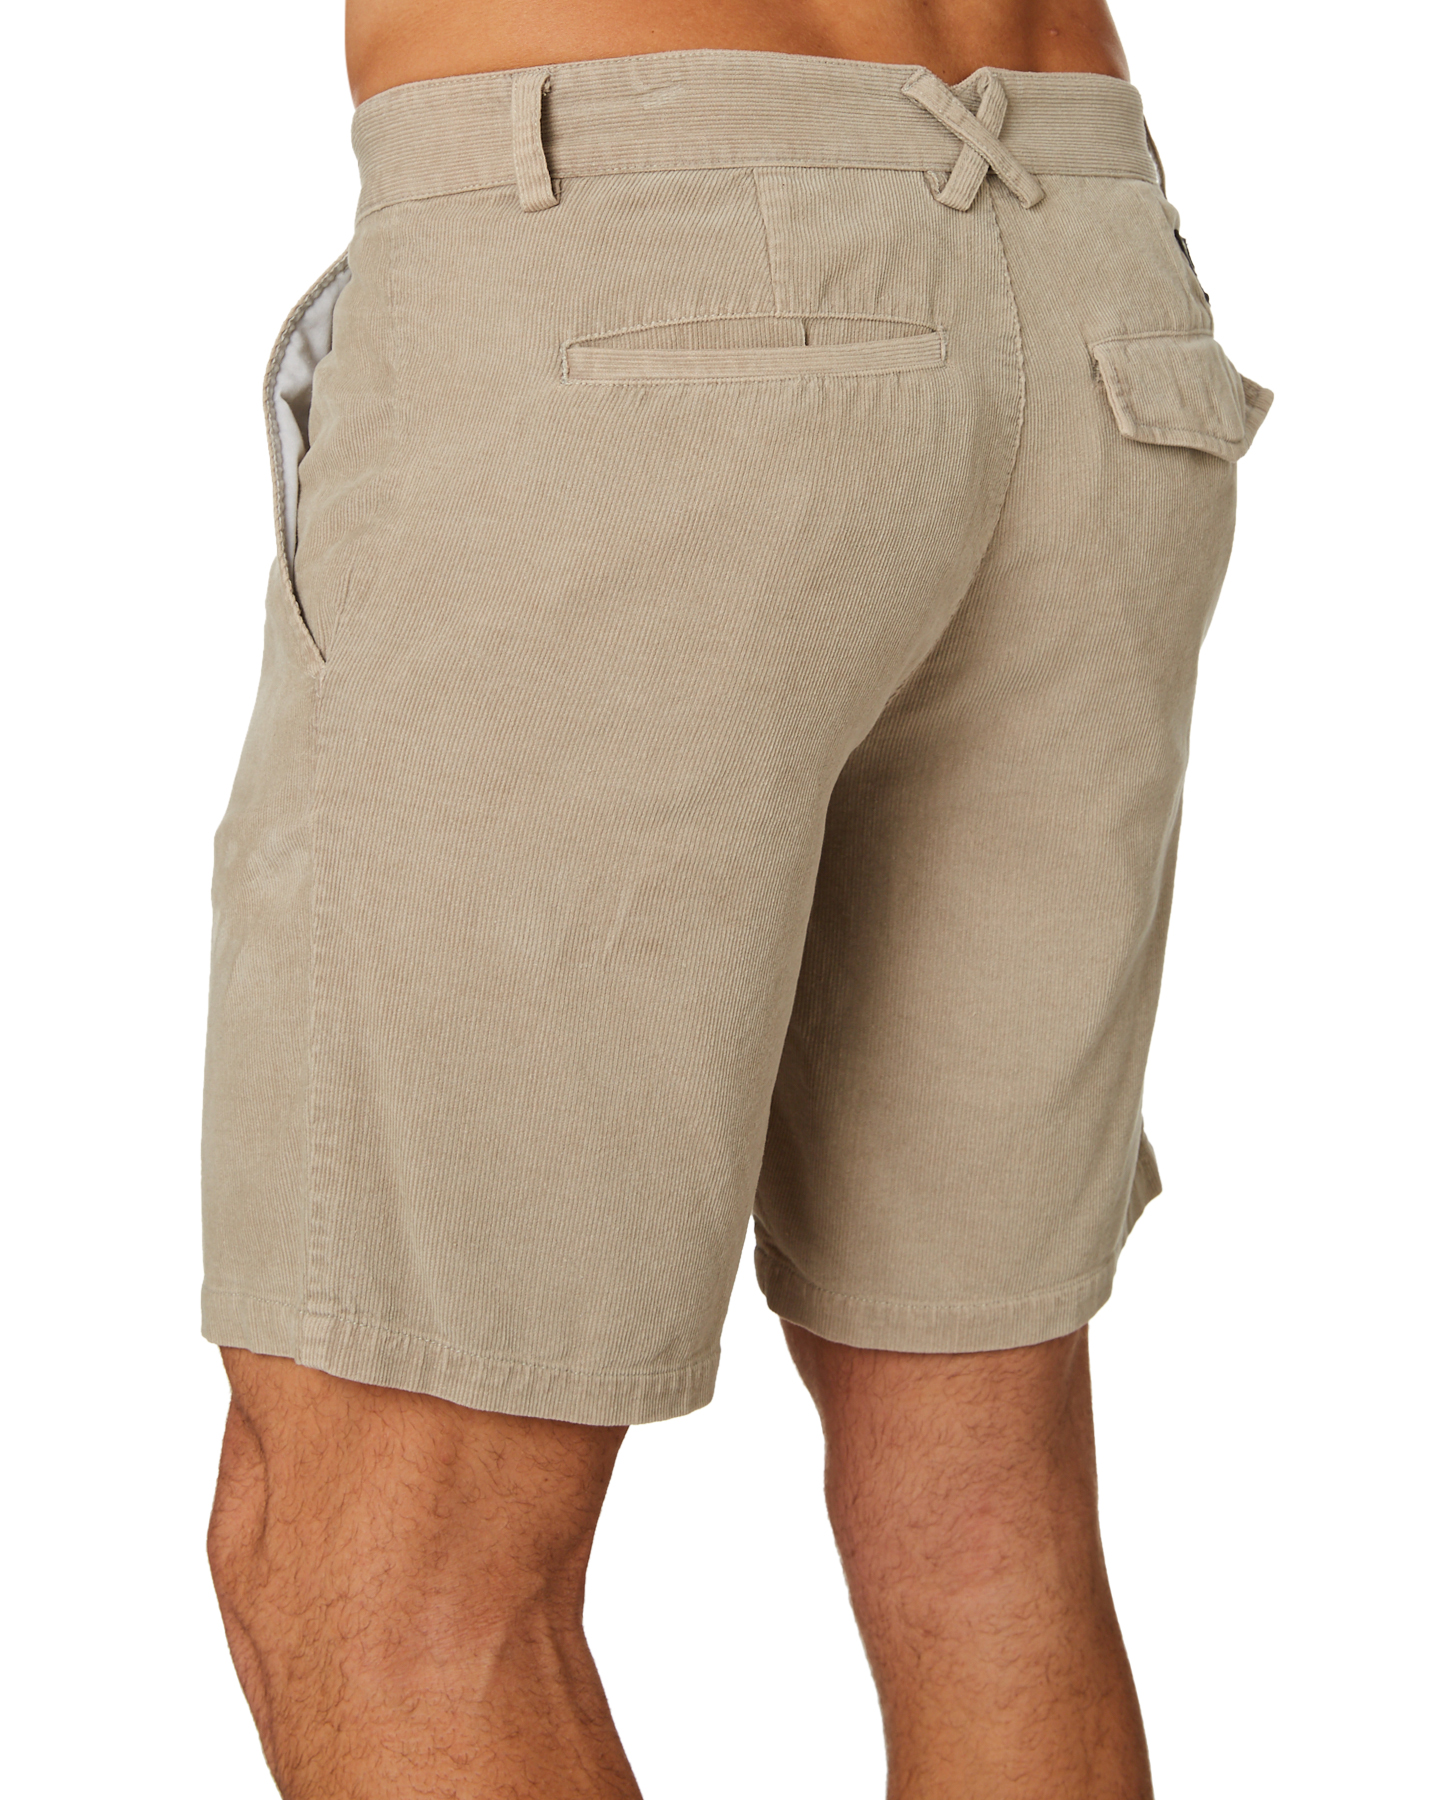 Insight Simmons Mens Cord Short - Stone | SurfStitch